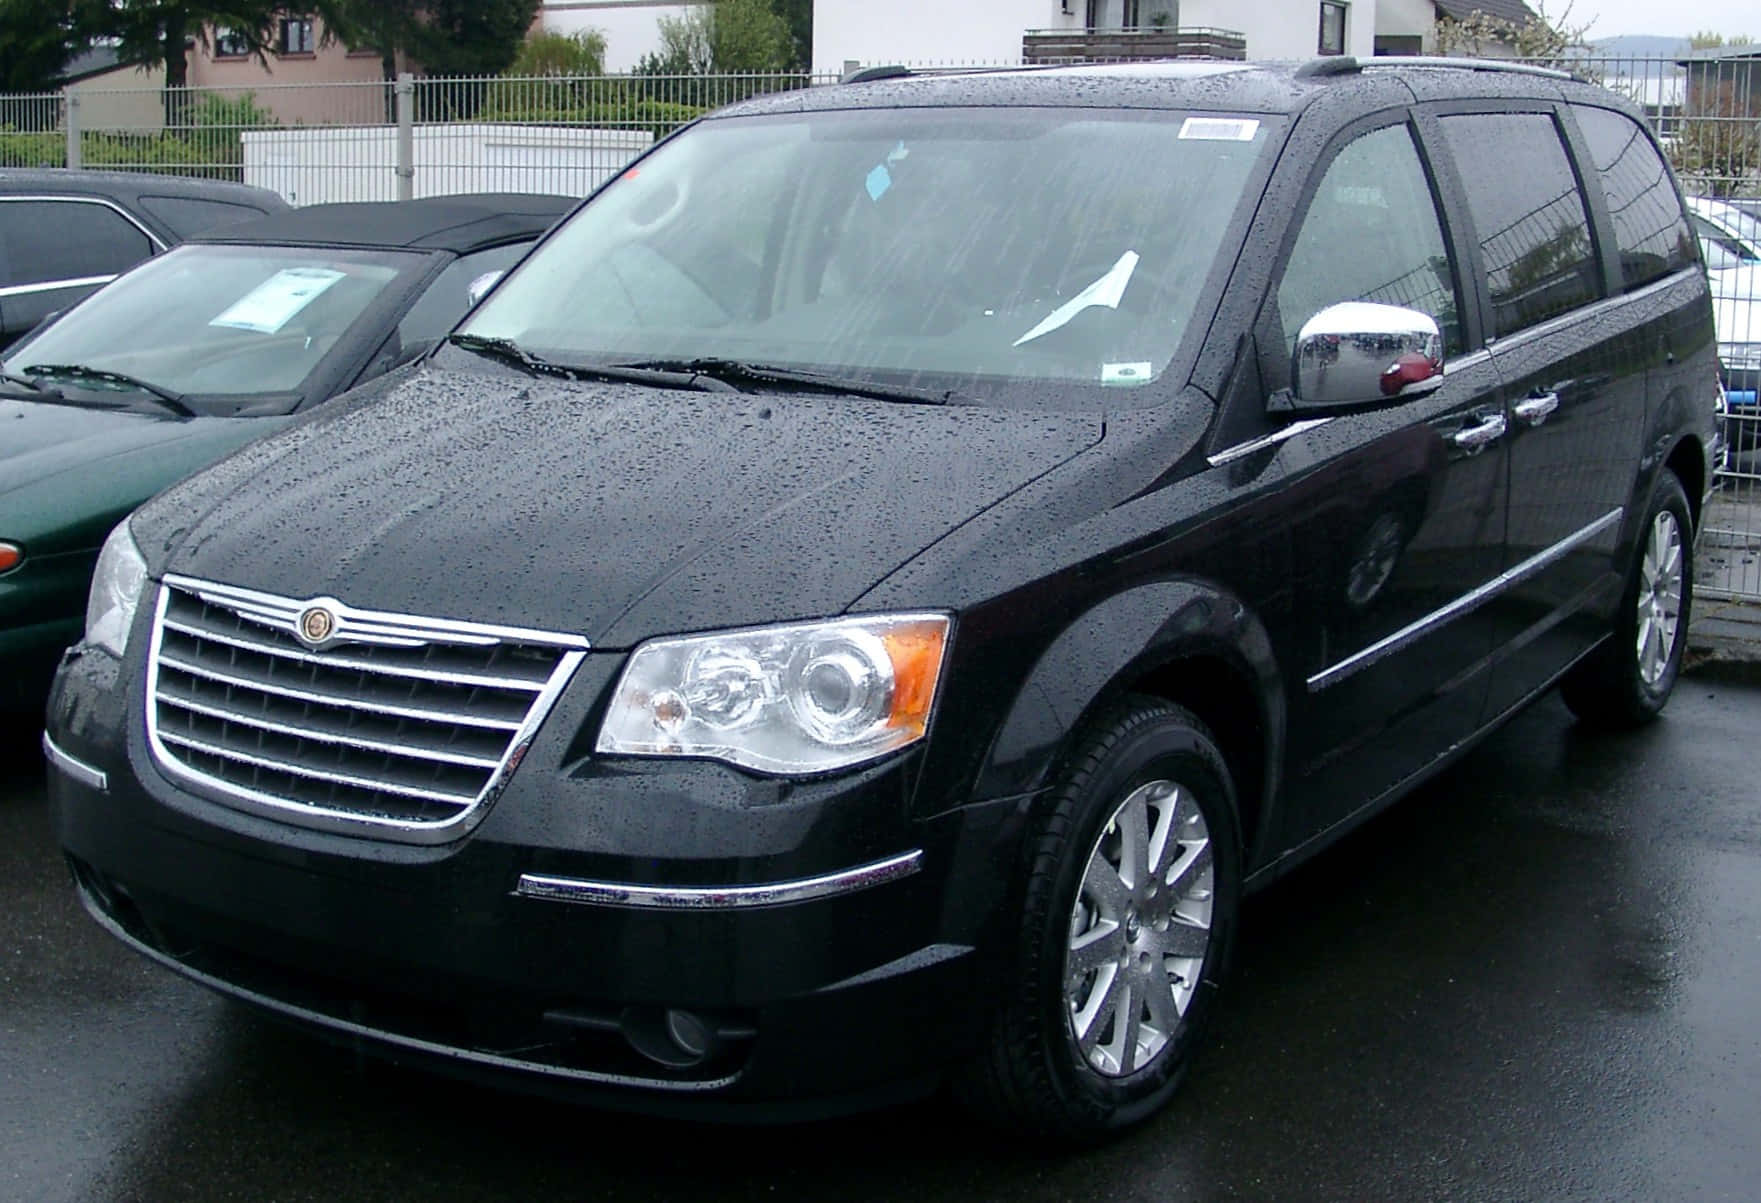 Sleek and Spacious Chrysler Voyager on the Road Wallpaper